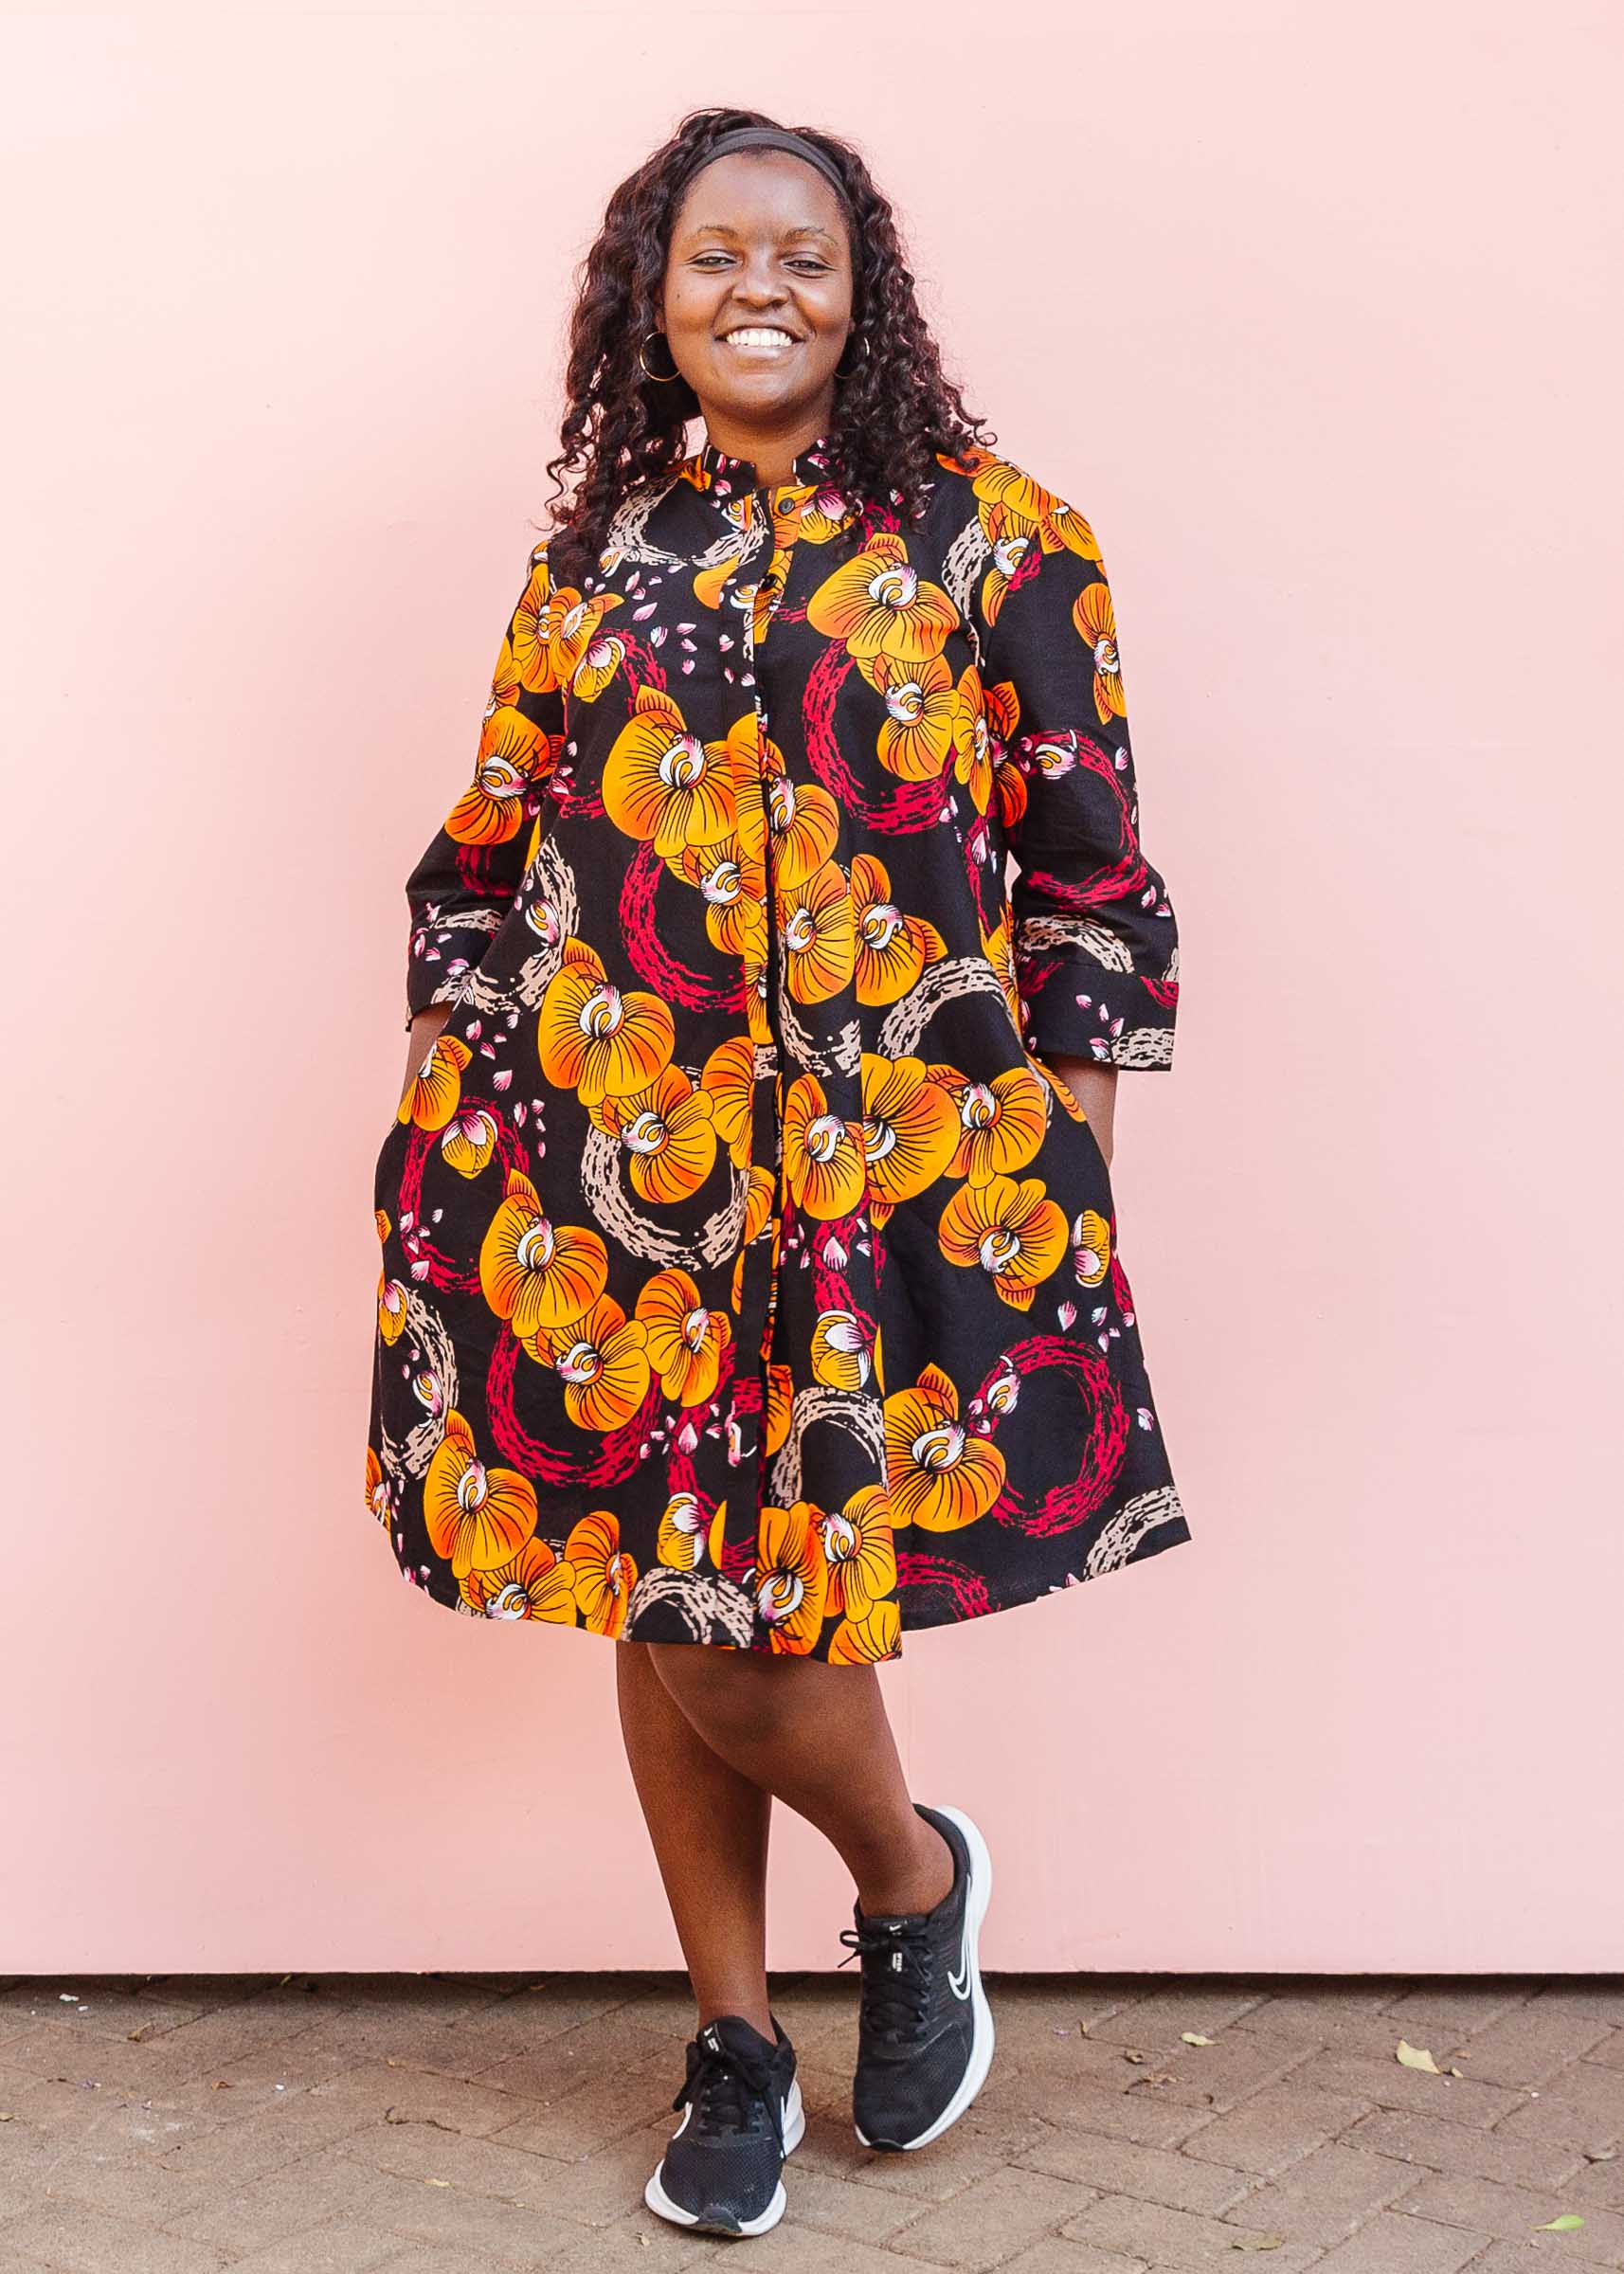 The model is wearing black dress with yellow and pink floral print.